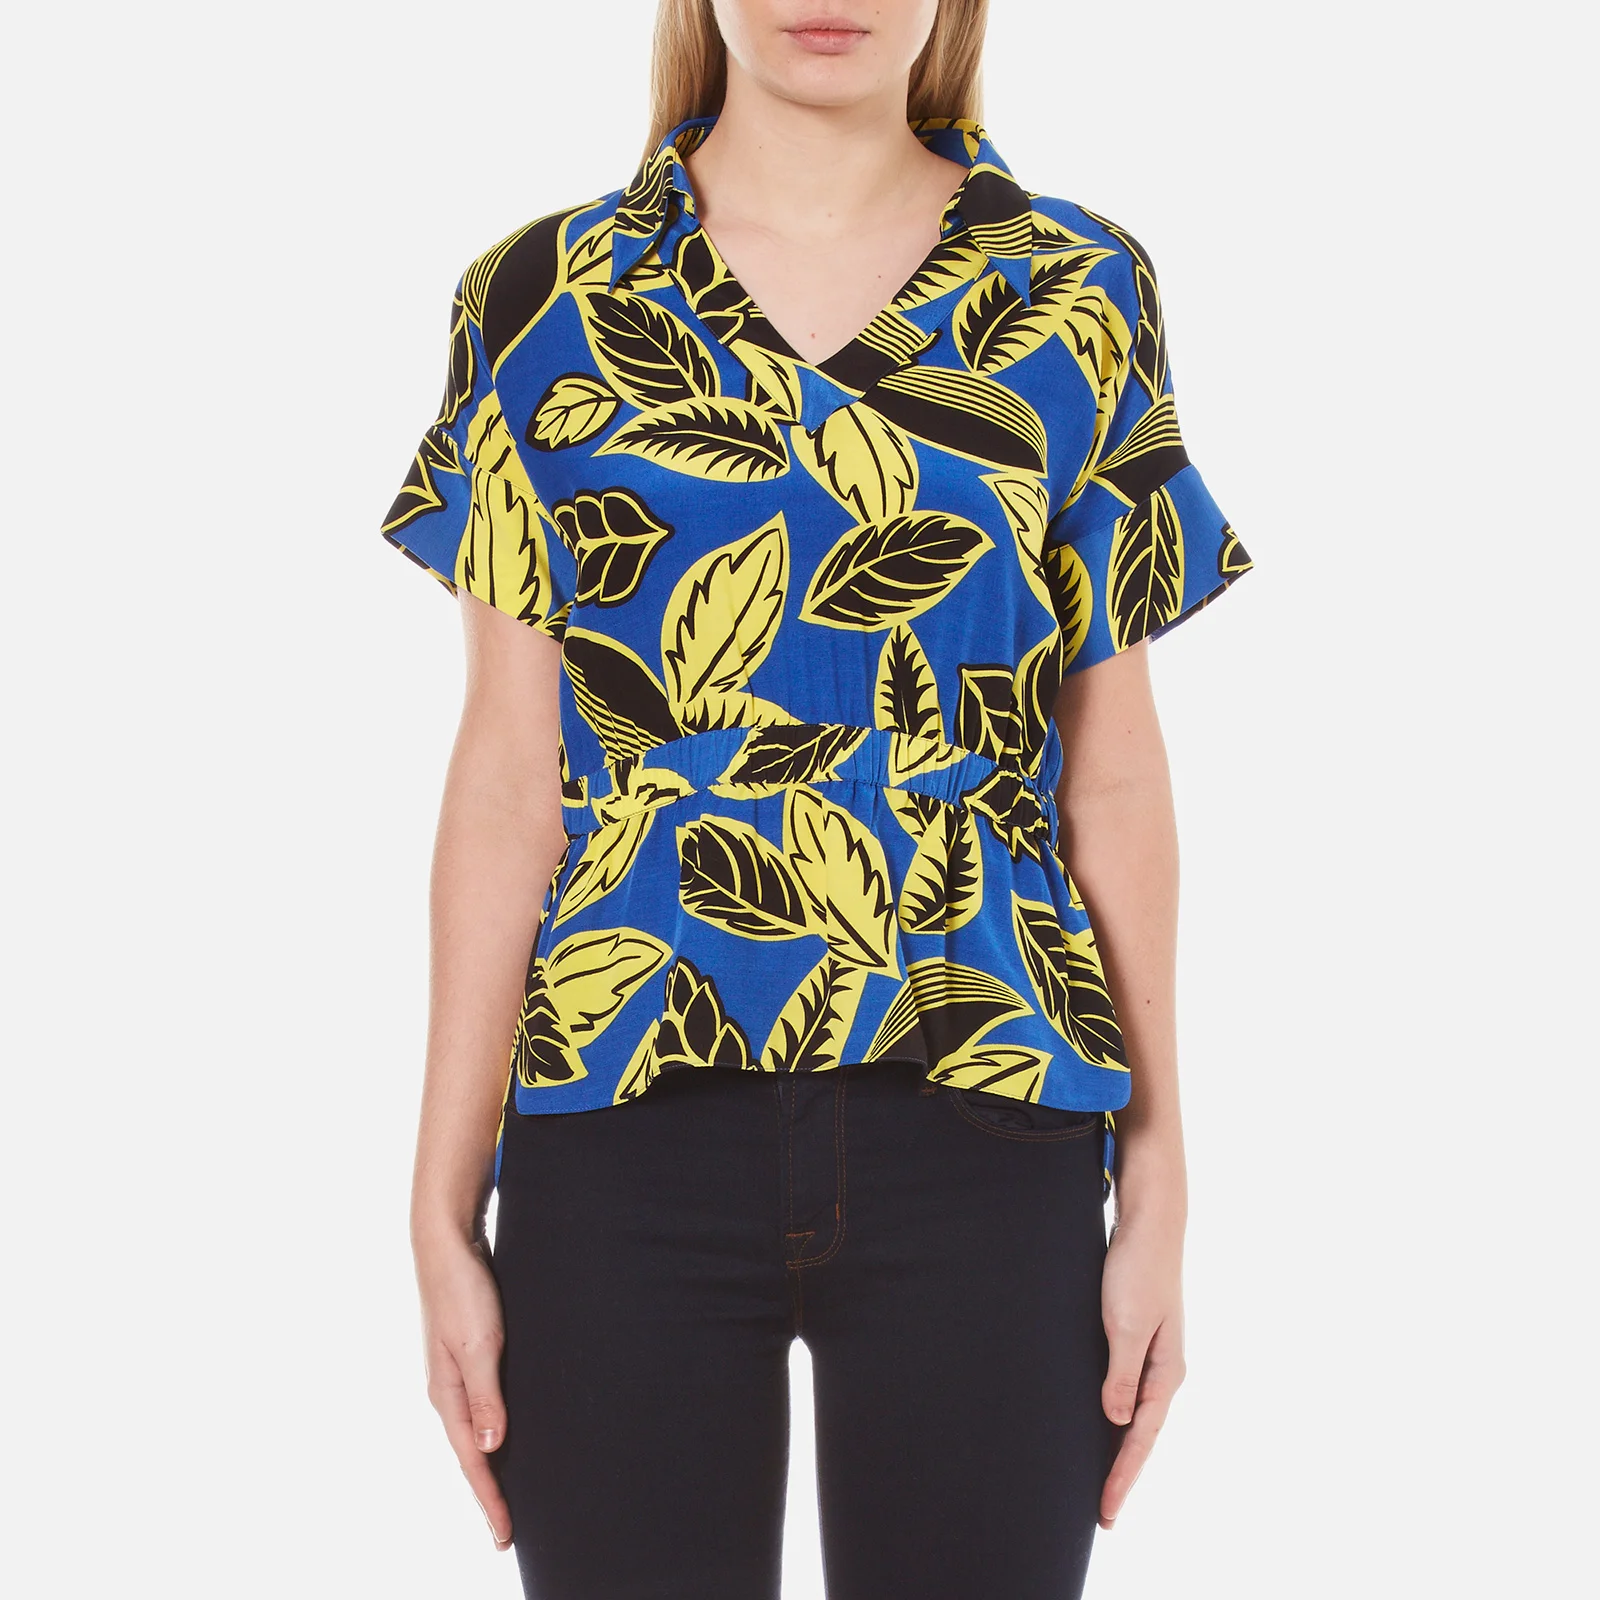 Boutique Moschino Women's V-Neck Printed Blouse with Collar - Multi Image 1